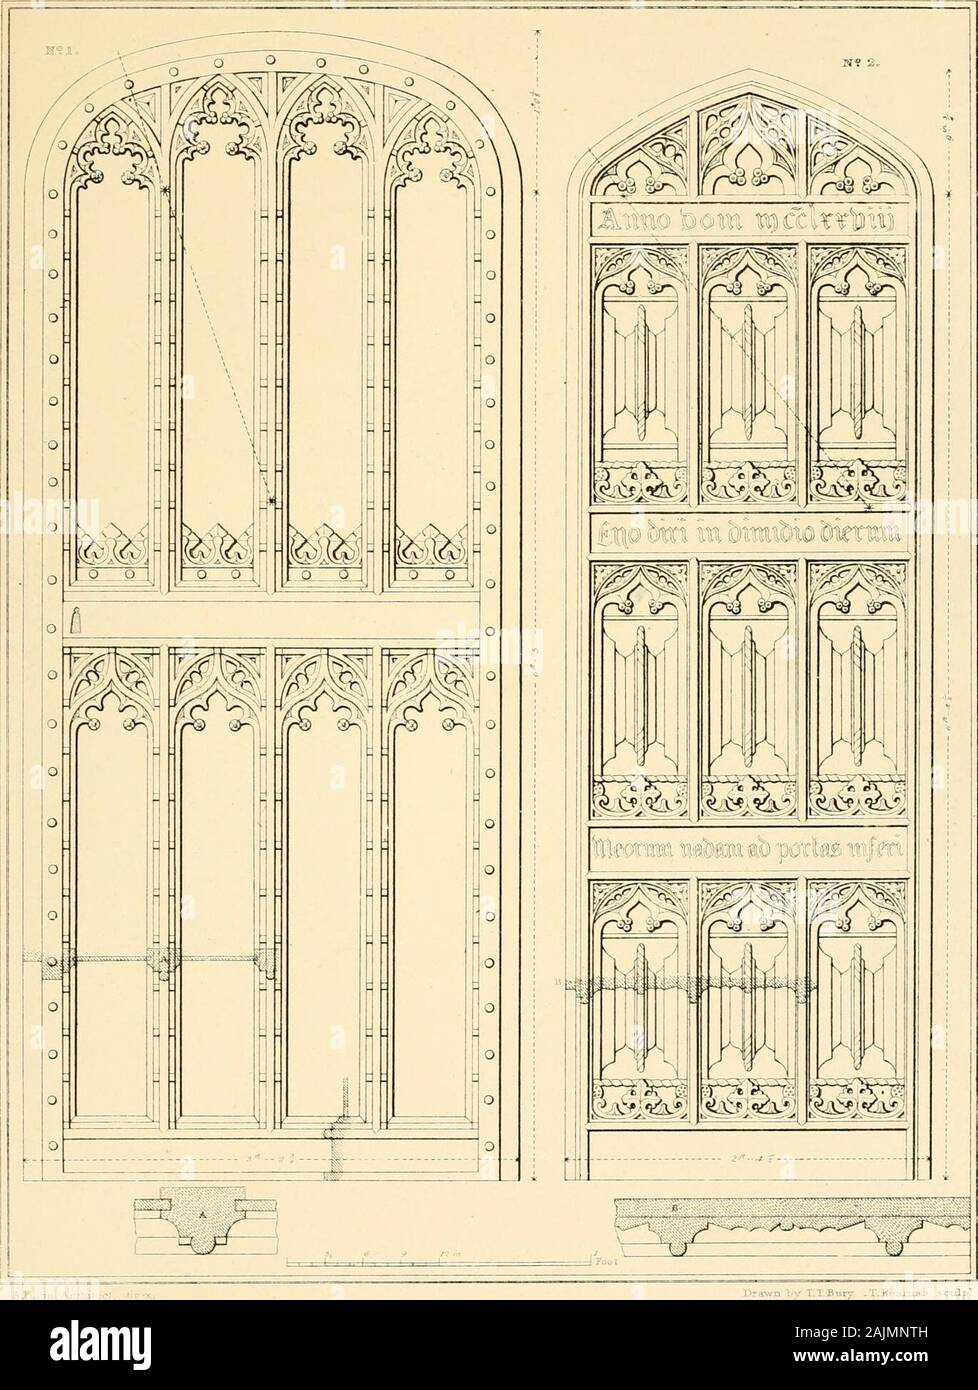 Examples of Gothic architecture : selected from various ancient edifices in England ; consisting of plans, elevations, sections, and parts at large ; calculated to exemplify the various styles and the practical construction of this admired class of architecture ; accompanied by historical and descriptive accounts . A Pugin. Arch.^ direi* rtrawTL.livB Fprr«V-—r.Lelteu3C,sculp: E r CI.E S IS^SIl TAjL A3.i* BIITK iTT^lUHE.. AE.:? jf- H s -fr.ifcJSBiro ?ryi7ex Ch&lt;7n^v Stock Photo